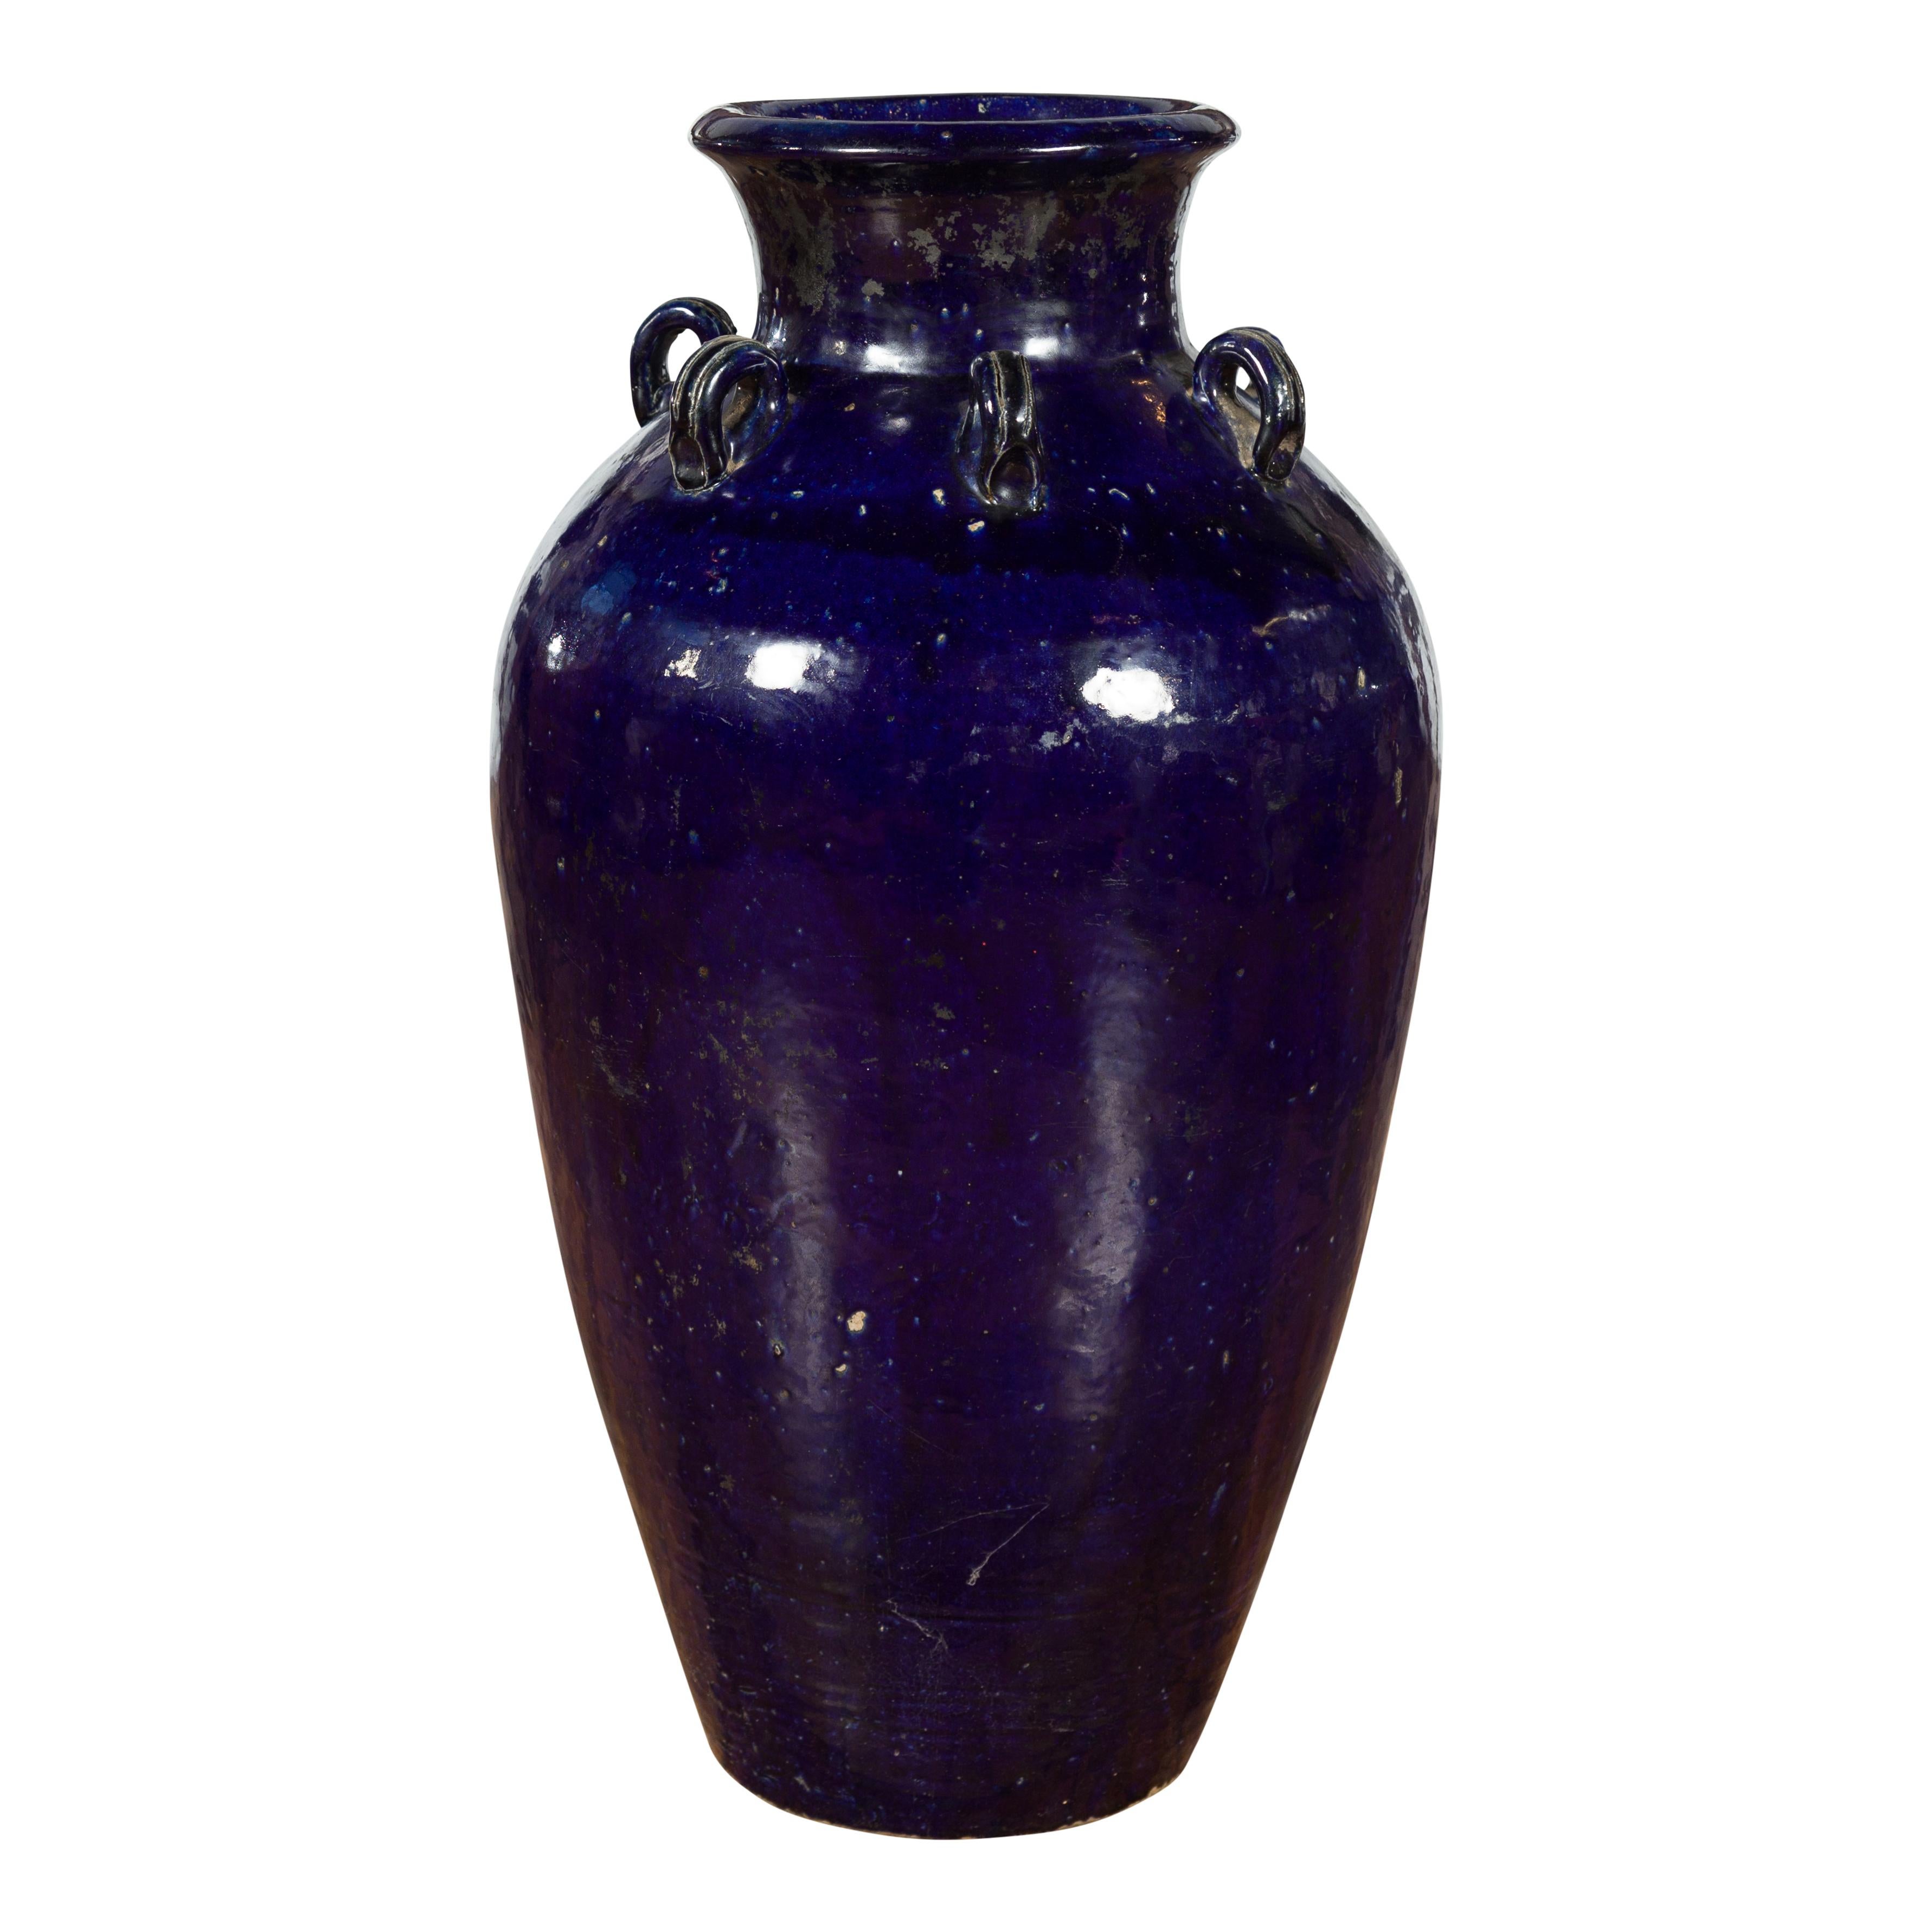 A large Chinese cobalt blue Martaban jar with petite loop handles. Created in China, this large antique cobalt blue Martaban vase is adorned with a series of petite loop handles through which a rope would have been passed to secure a top. The